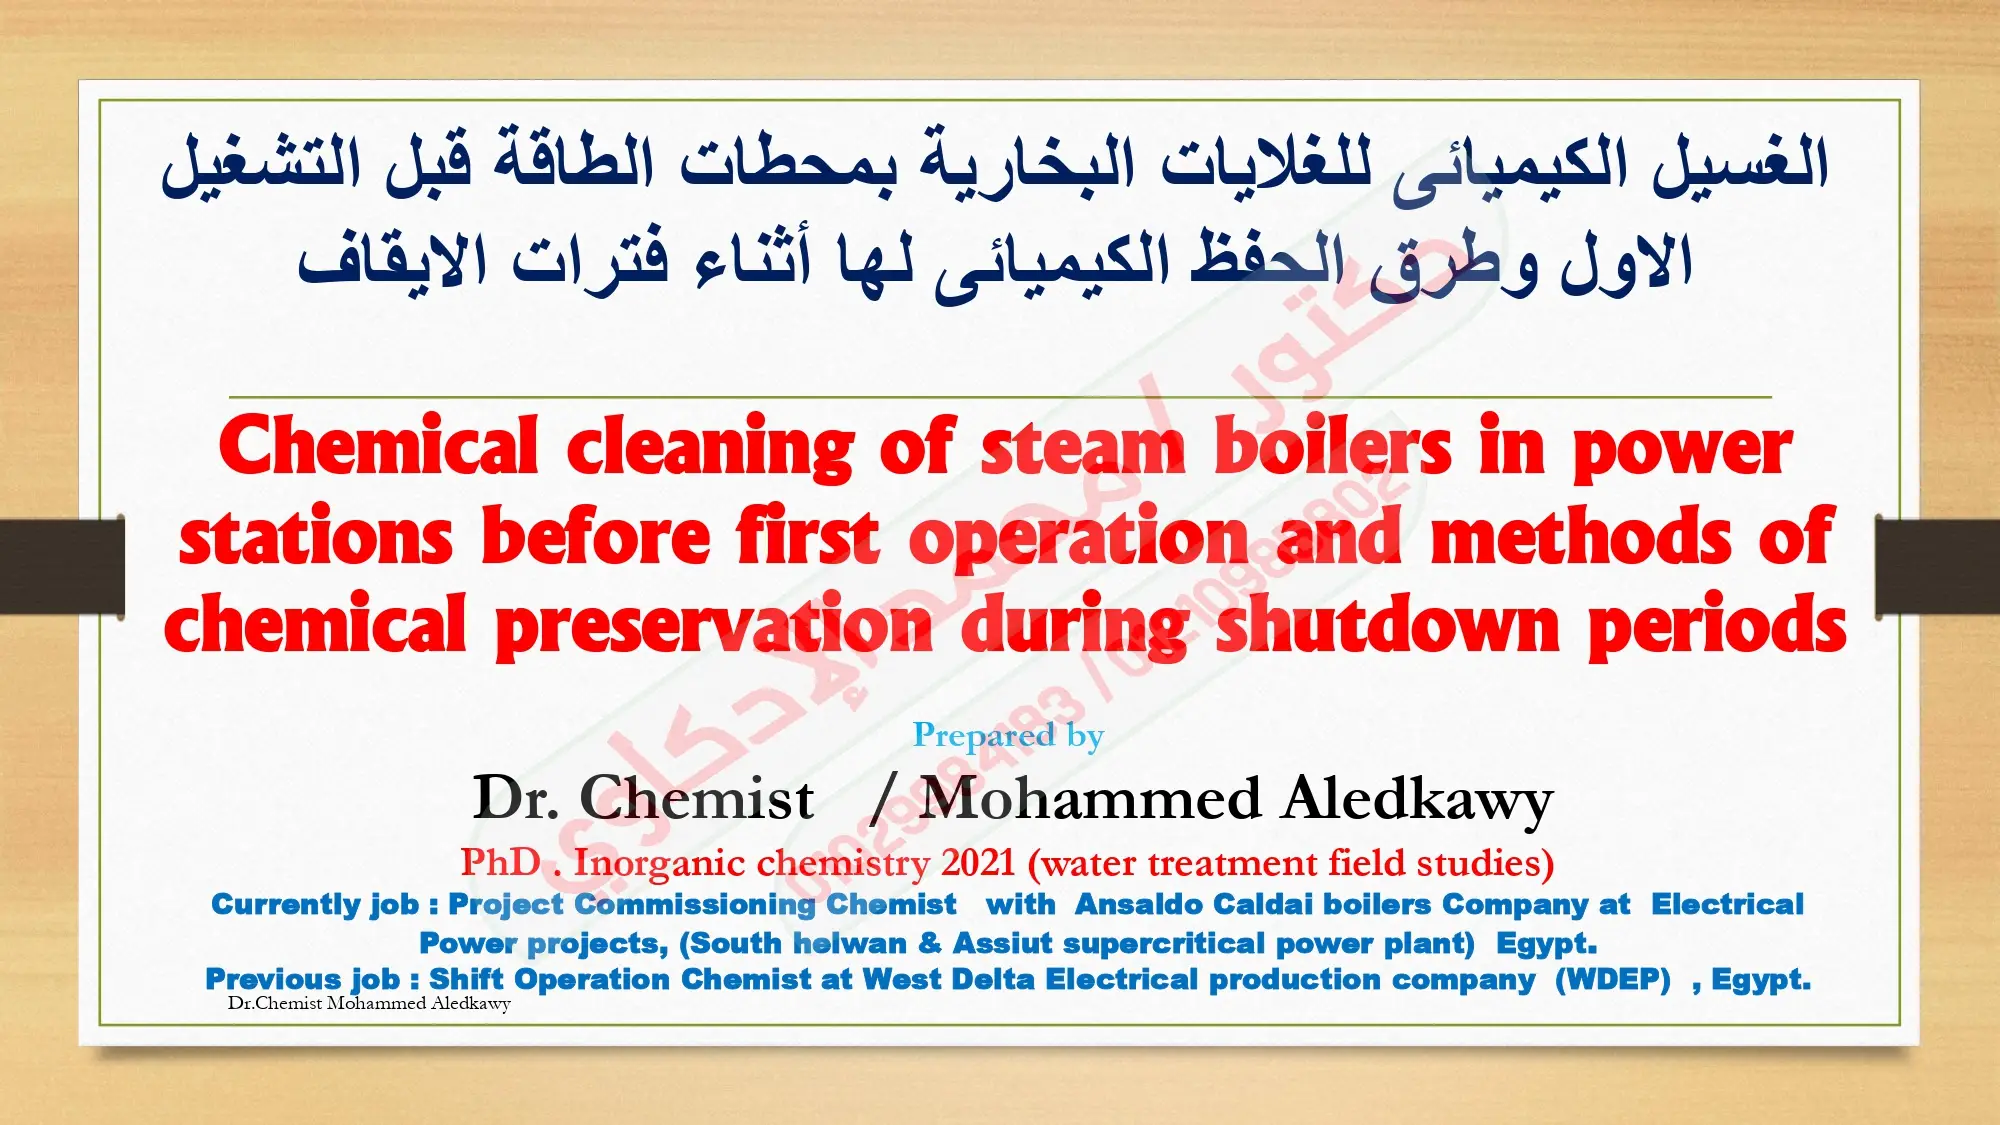 Chemical Cleaning Of Steam Boilers In Power Stations Before First Operation And Methods Of Chemical Preservation During Shutdown Periods